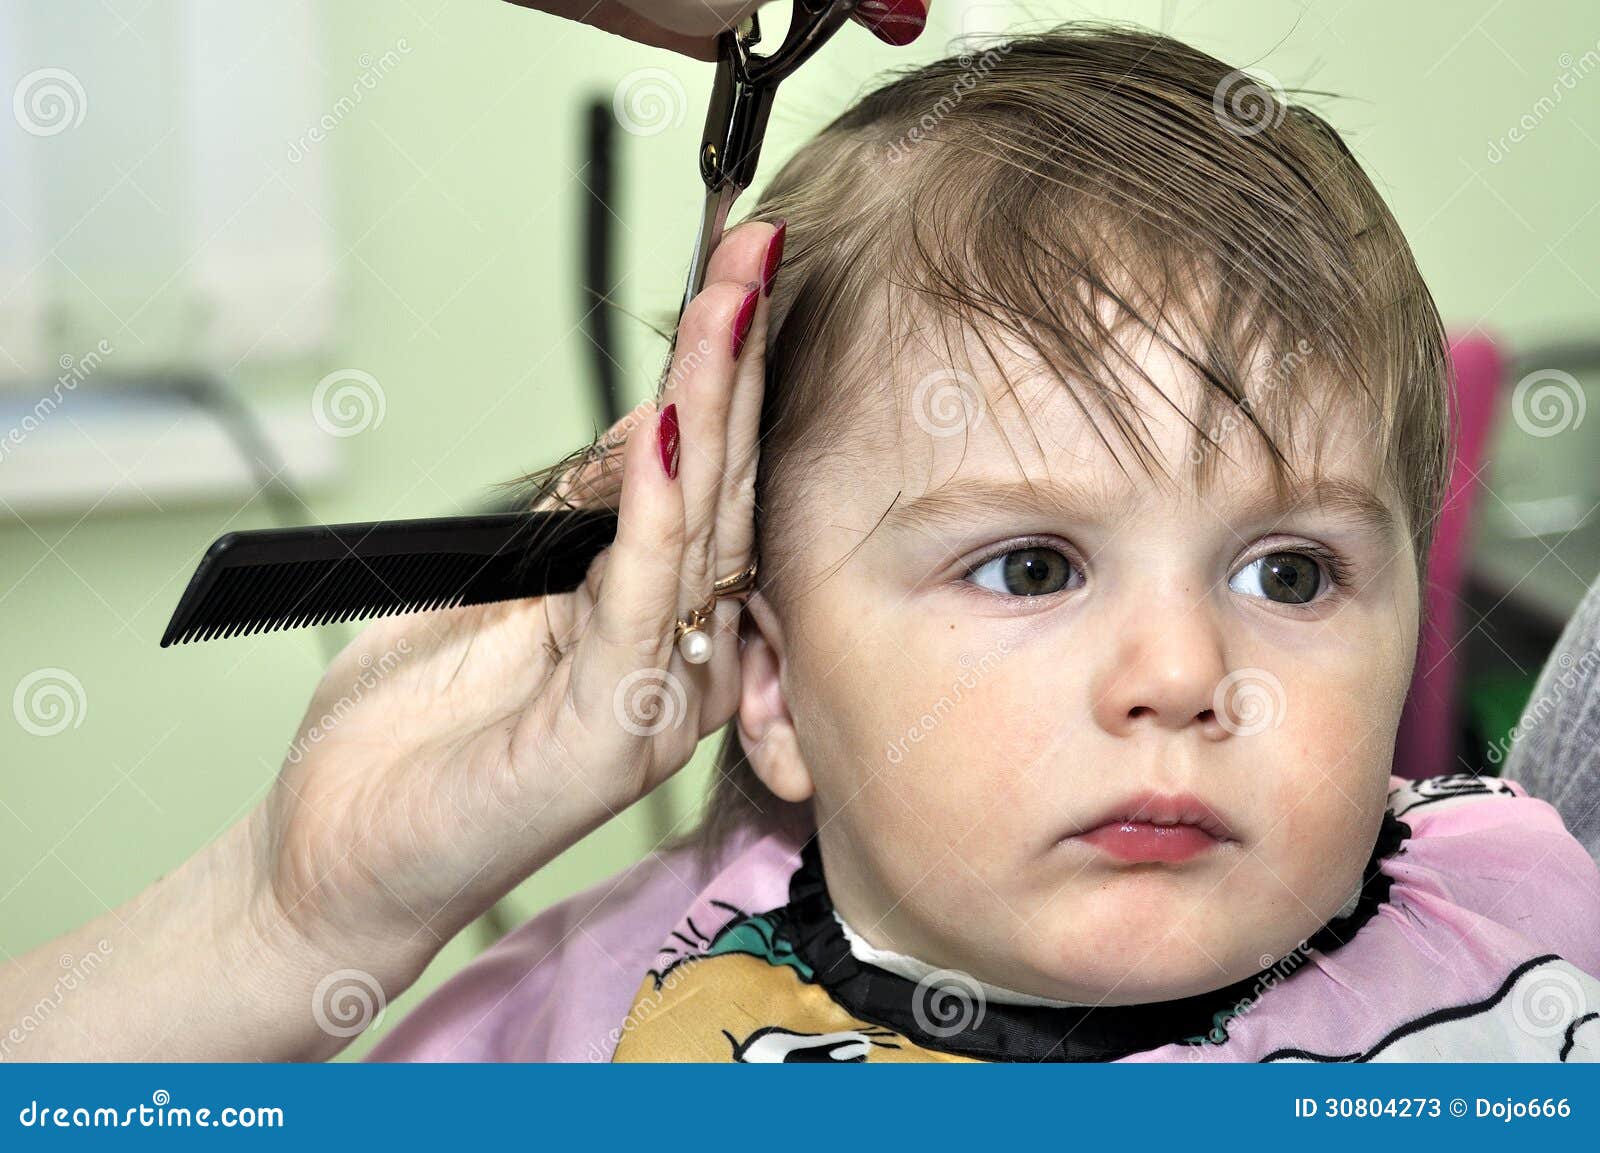 Hairstyle One Year Old Child Stock Image Image Of People